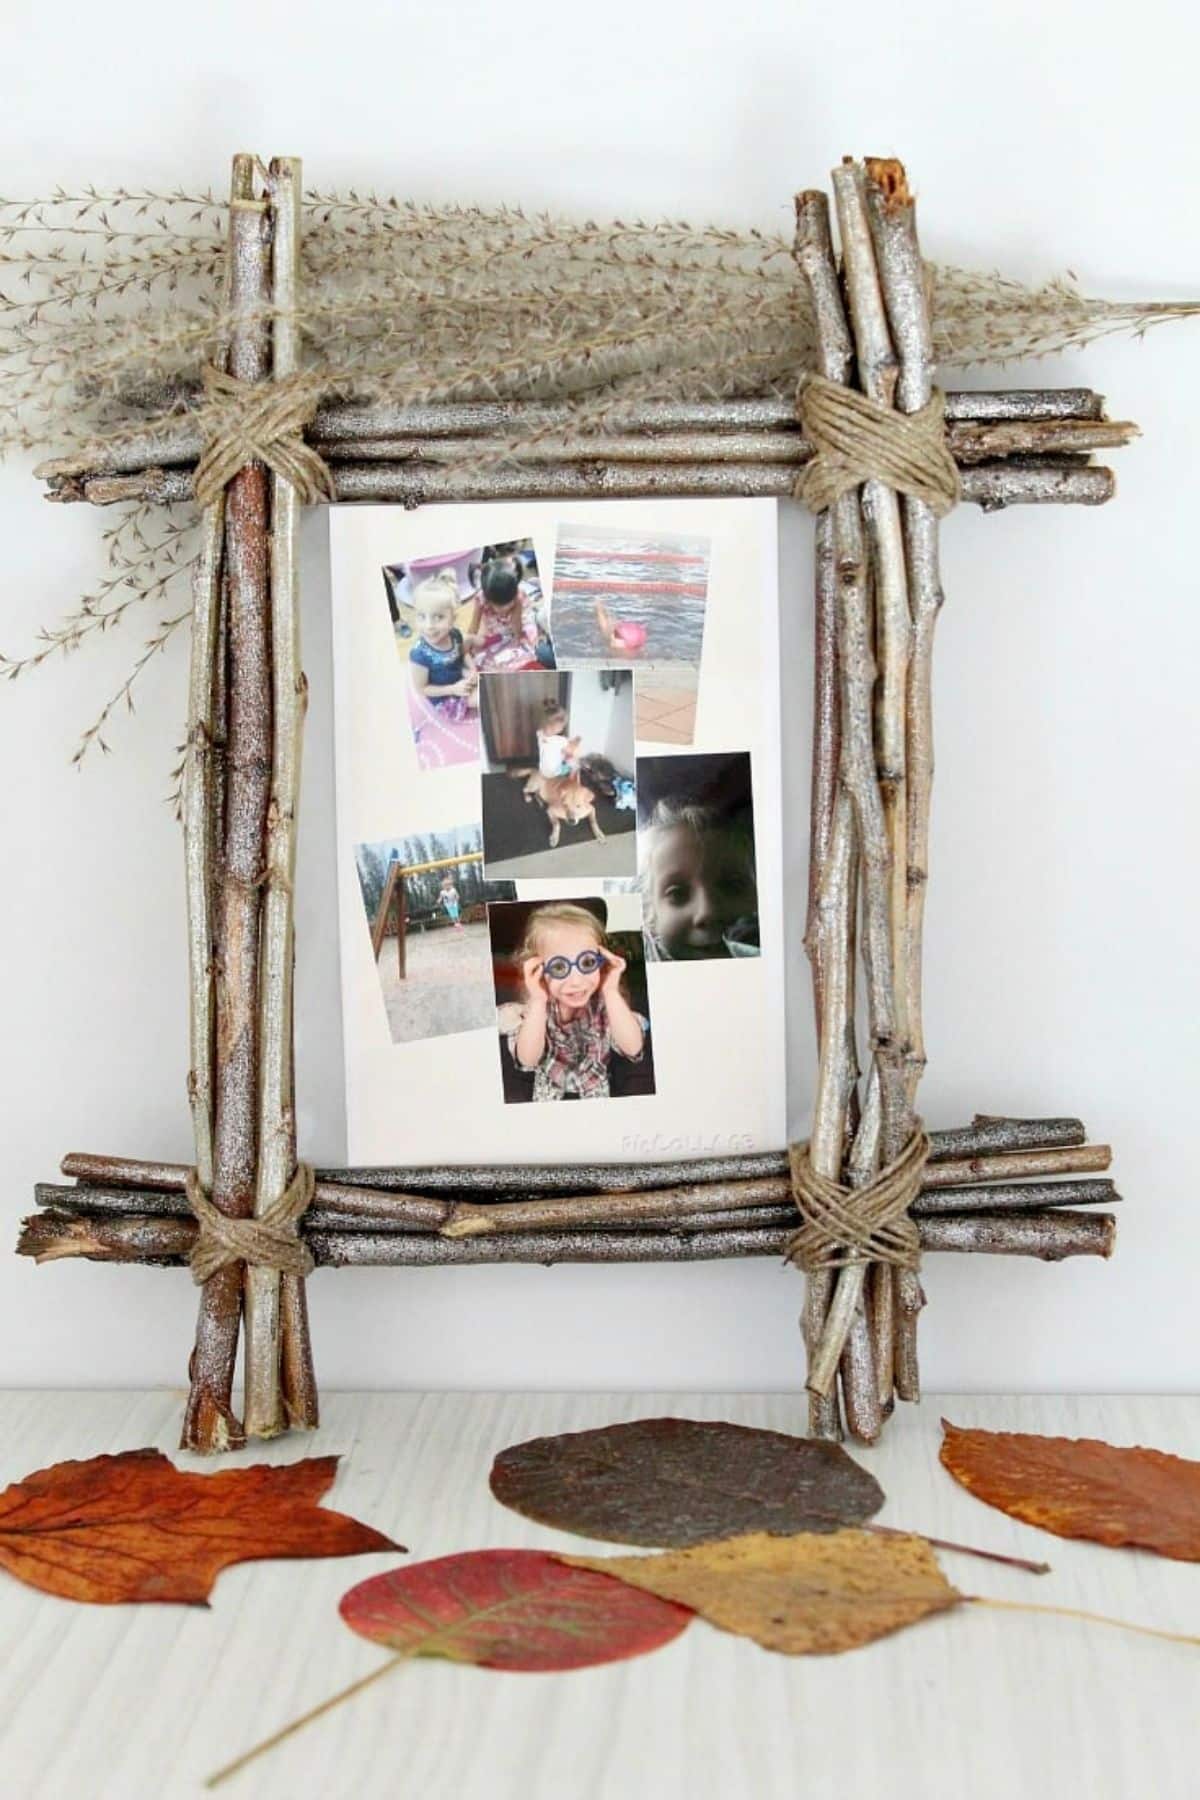 DIY Rustic Photo Frame Made With Twigs